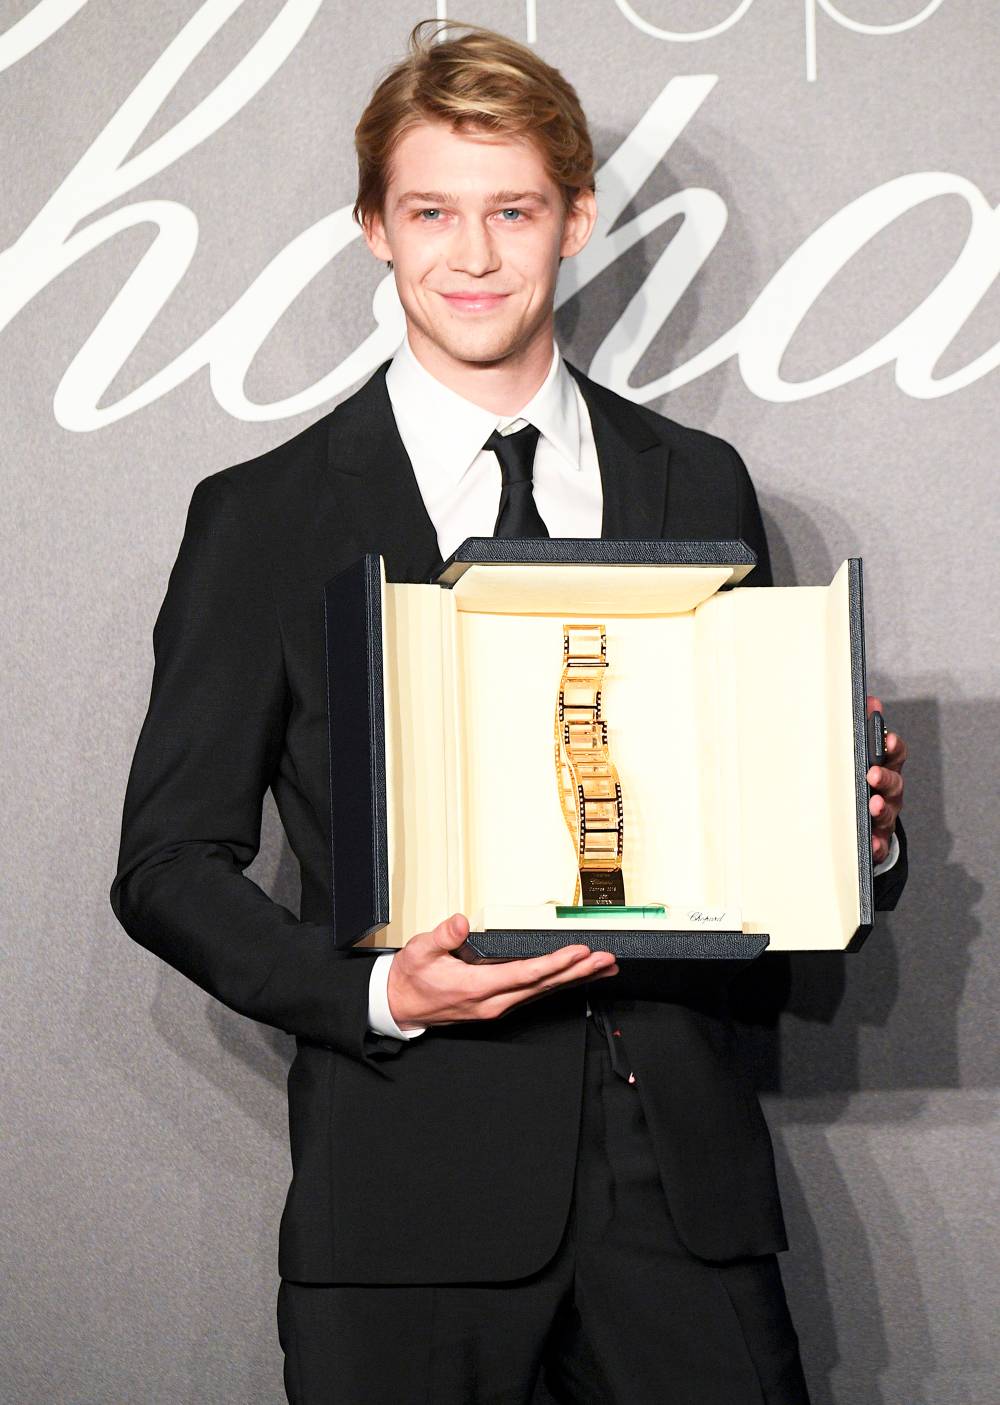 Joe Alwyn holds the throphy at Chopard Trophy photocall during the 71st annual Cannes Film Festival at Martinez Hotel on May 14, 2018 in Cannes, France.